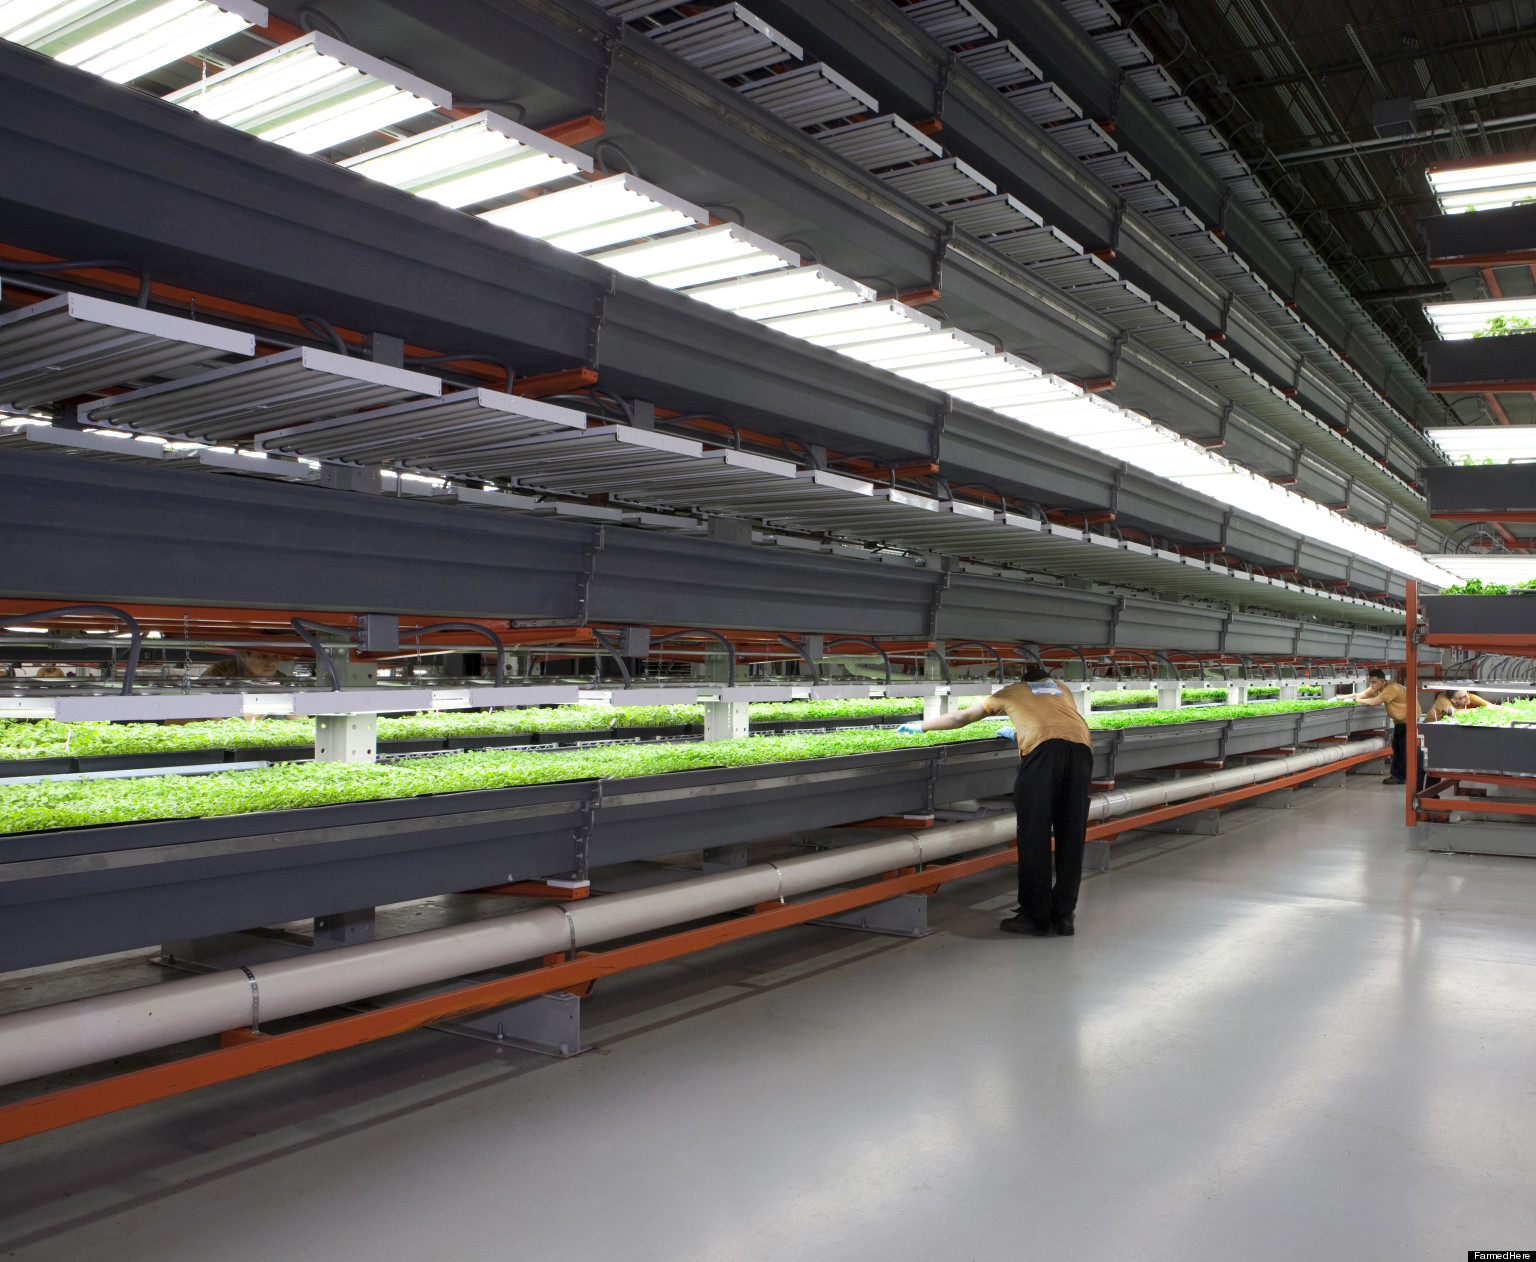 ... Nation's Largest Indoor Vertical Farm, Opens In Chicago Area (PHOTOS